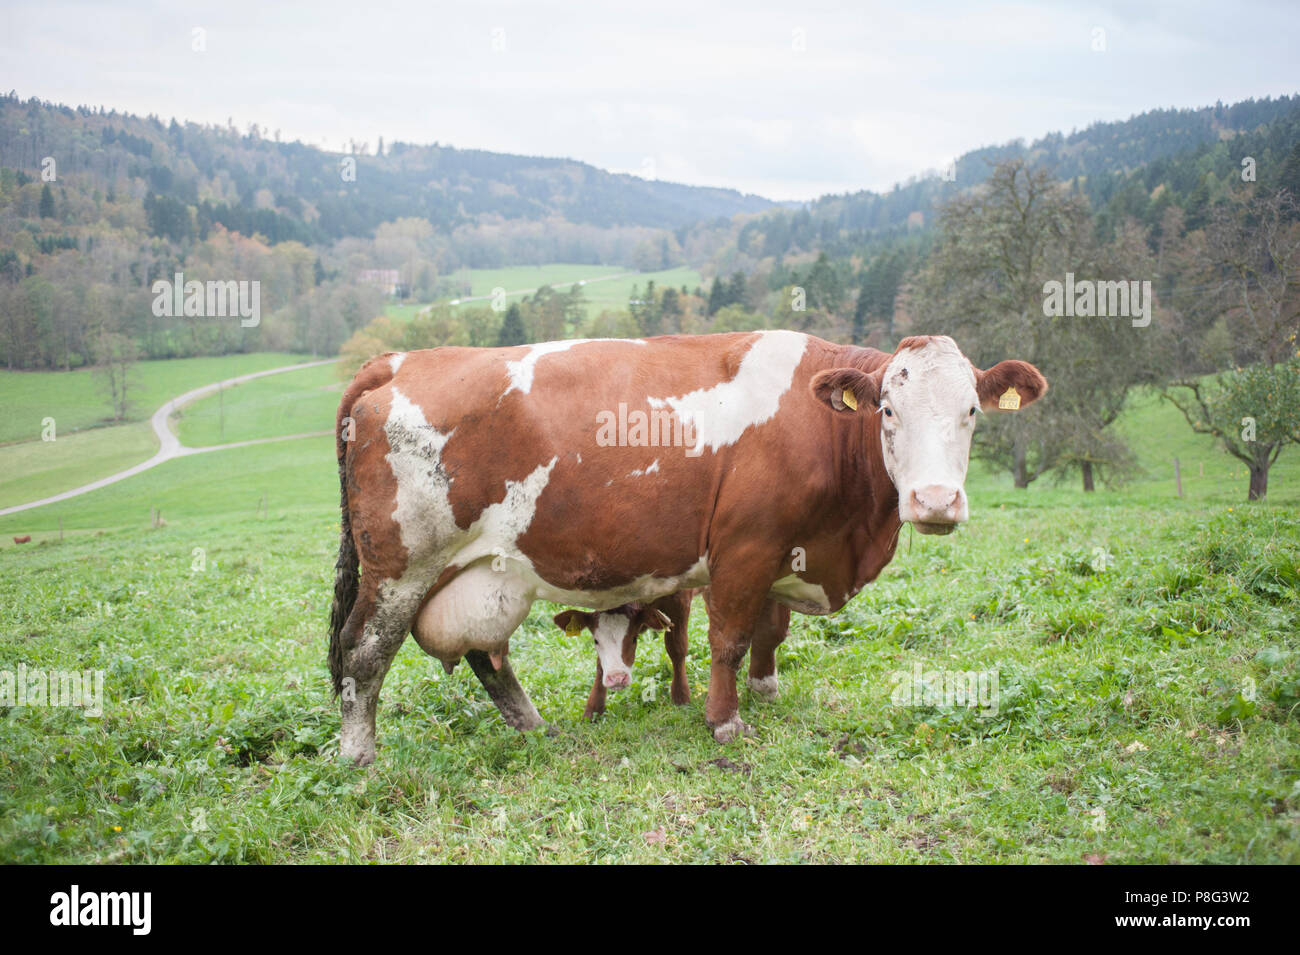 Domestic Cattle, cow with calf, rot valley, Schwaebisch Hall, Hohenlohe region, Baden-Wuerttemberg, Heilbronn-Franconia, Germany Stock Photo